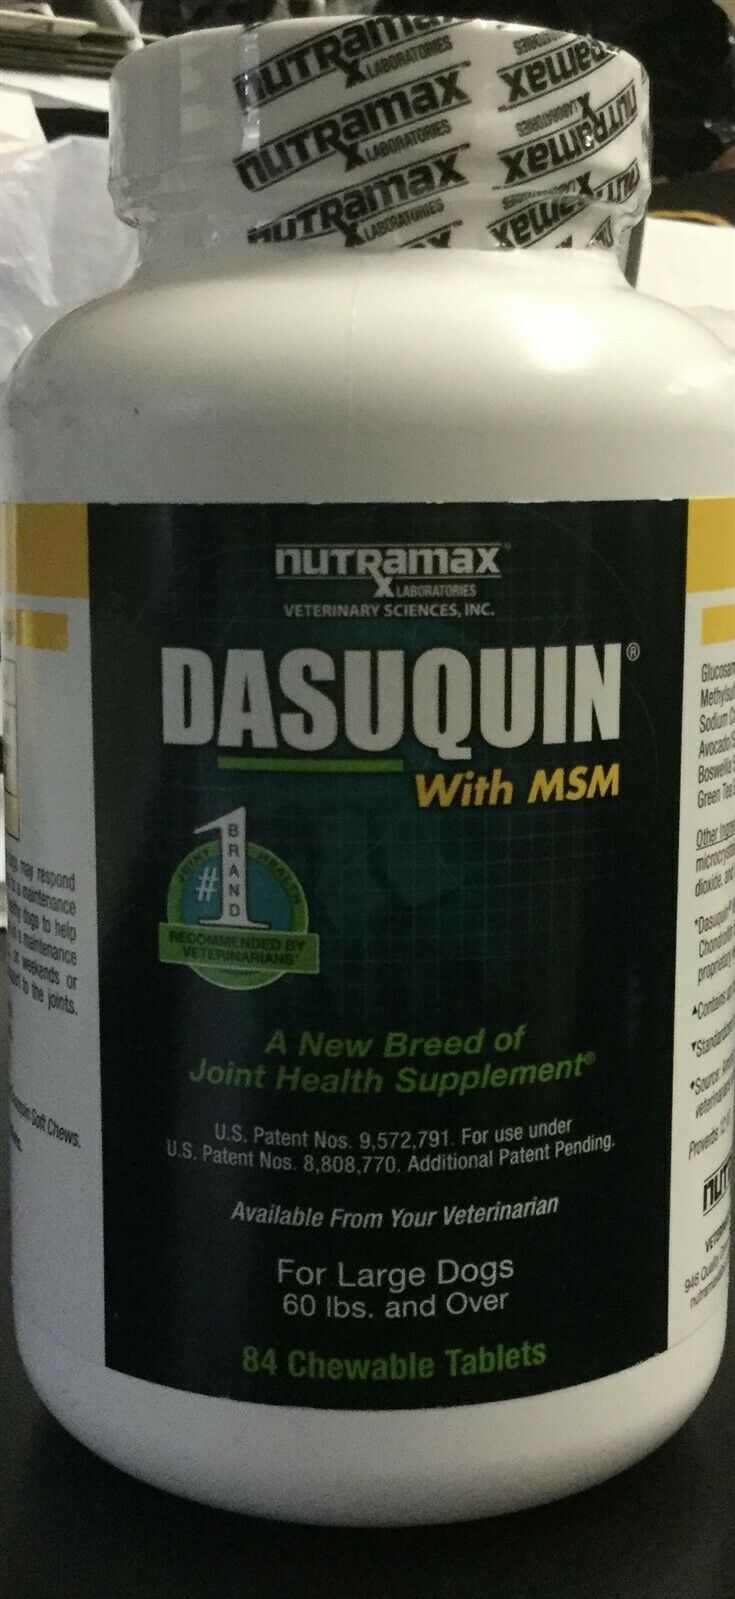 Dasuquin With Msm For Large Dogs (84 Chewable Tablets) Exp 11/23 #0262